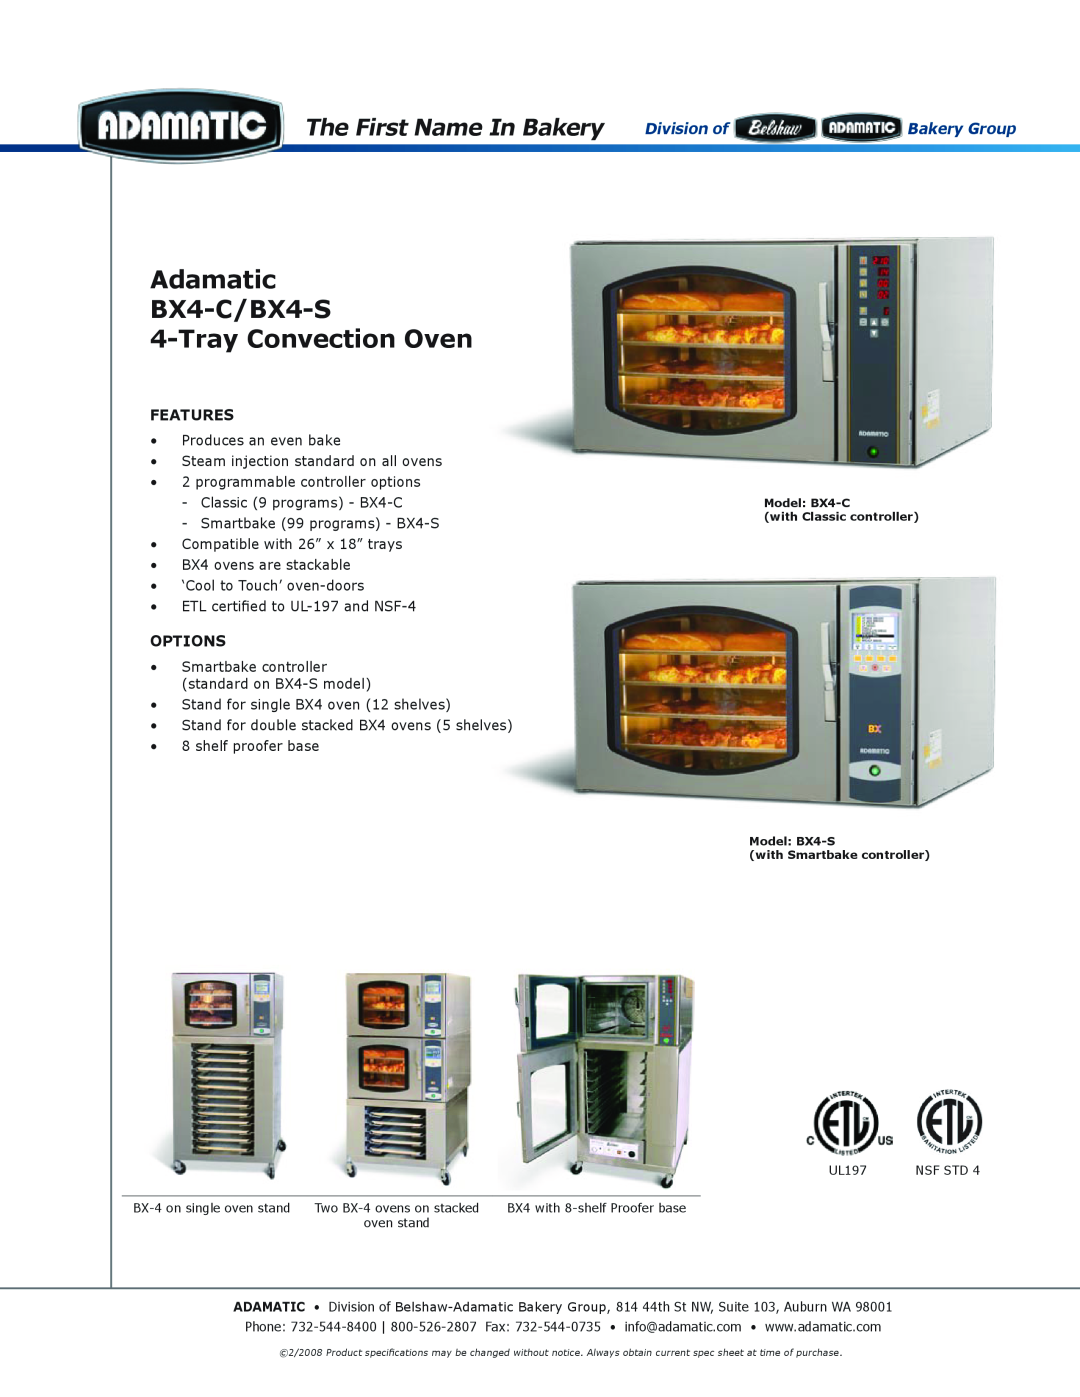 Belshaw Brothers manual Features, Options, Adamatic BX4-C/BX4-S 4-TrayConvection Oven 